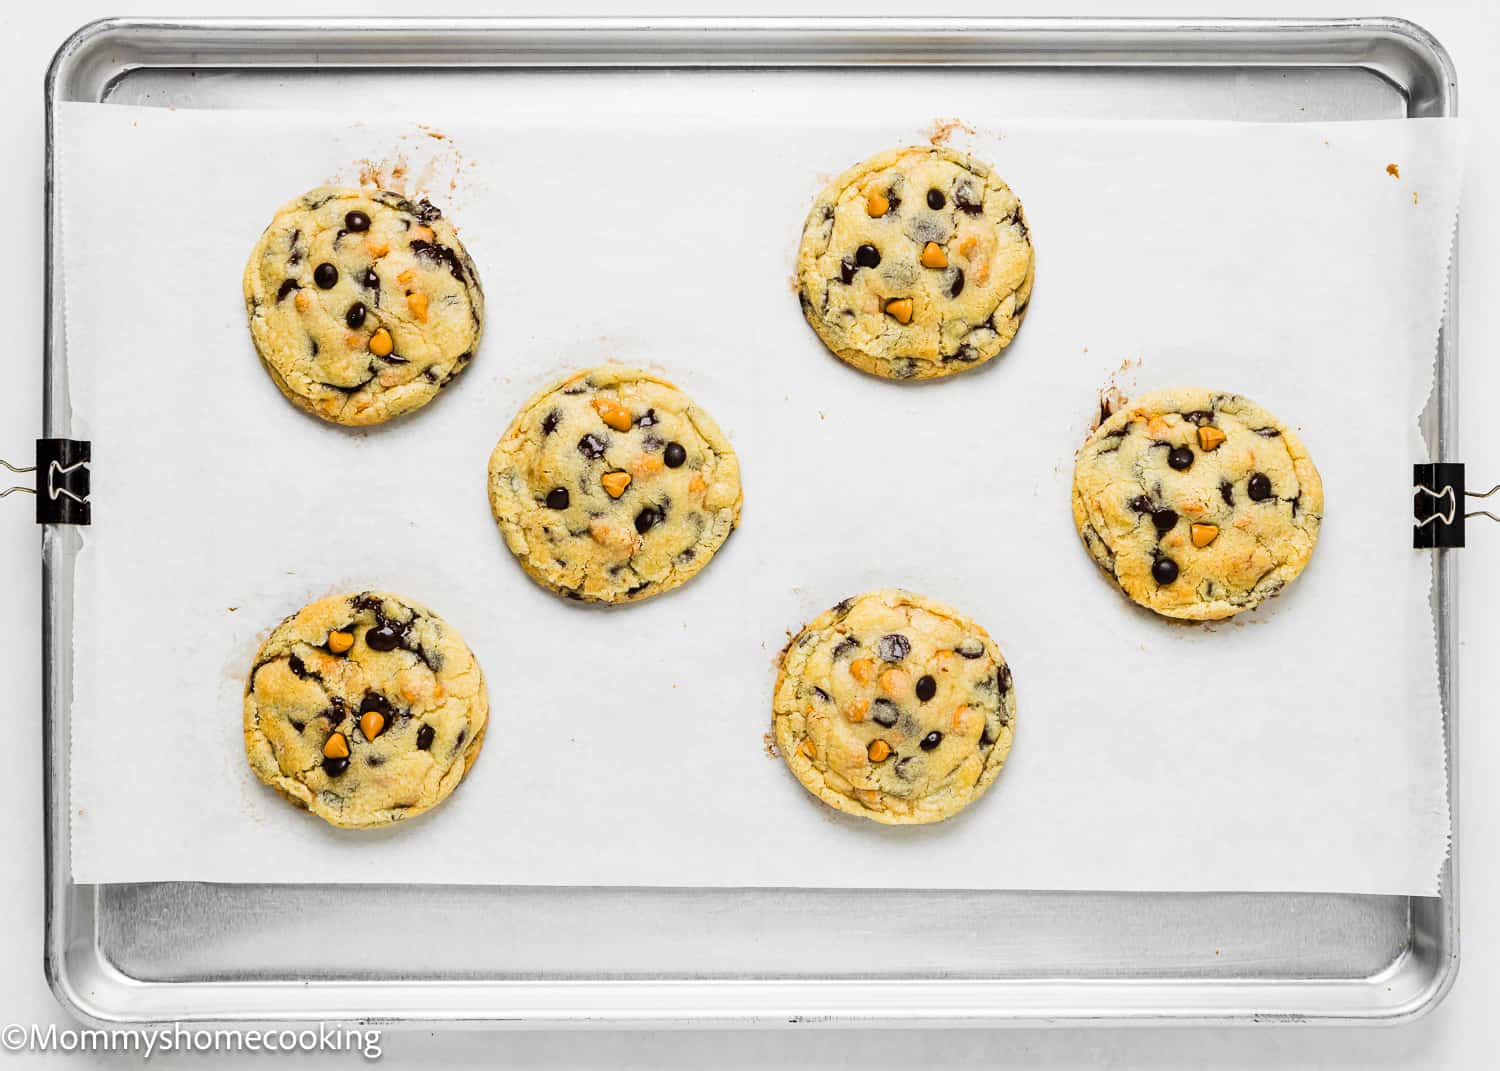 baked eggless Butterscotch Chocolate Chip Cookies on a baking tray.